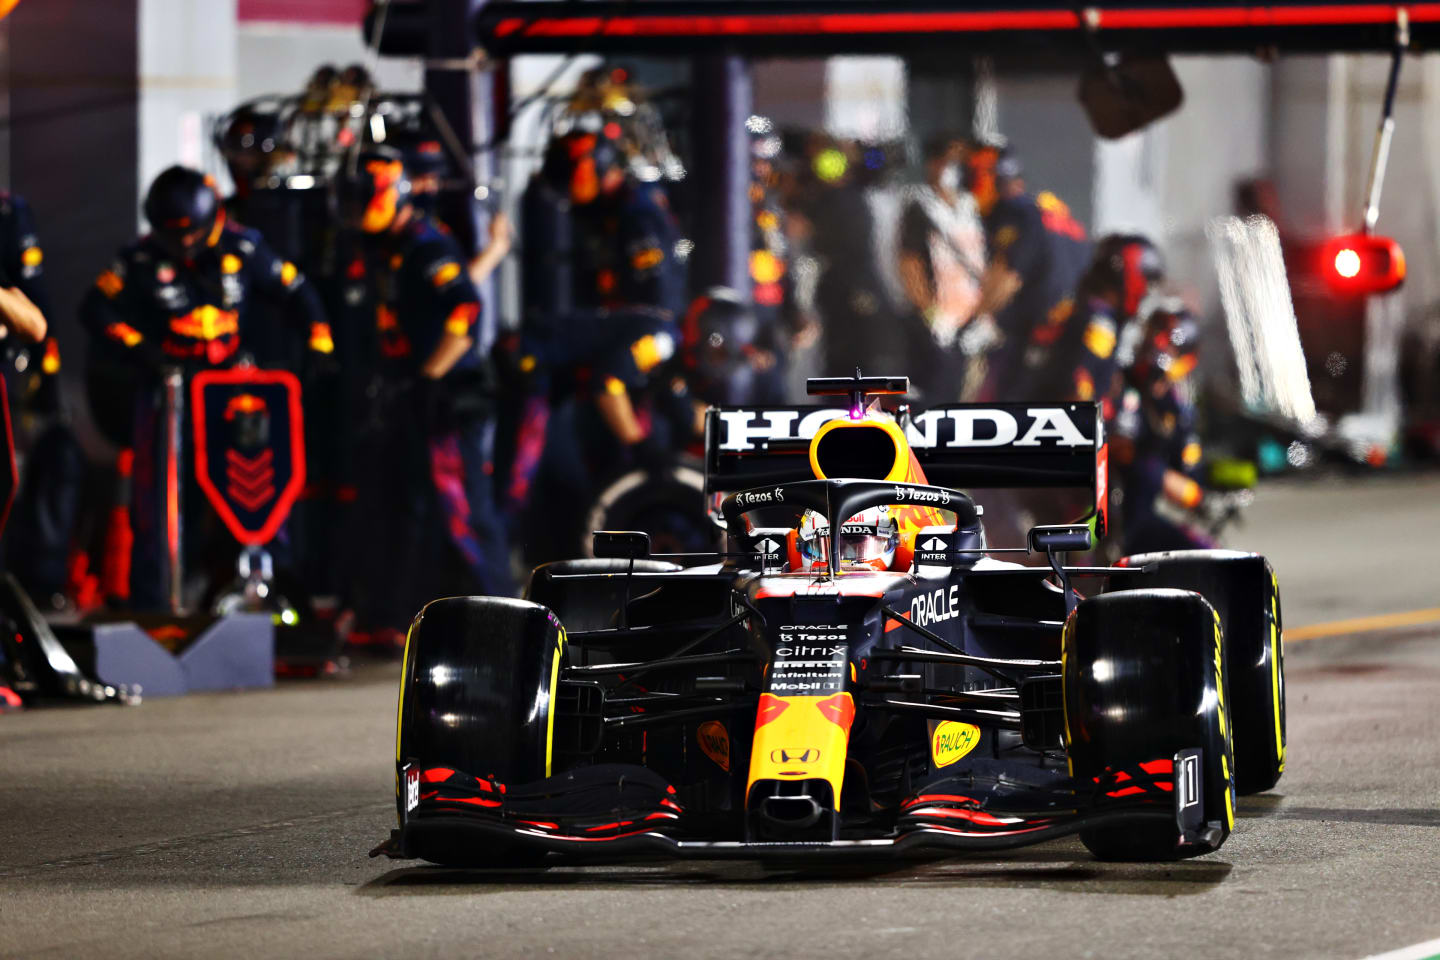 DOHA, QATAR - NOVEMBER 21: Max Verstappen of Netherlands and Red Bull Racing makes a pitstop during